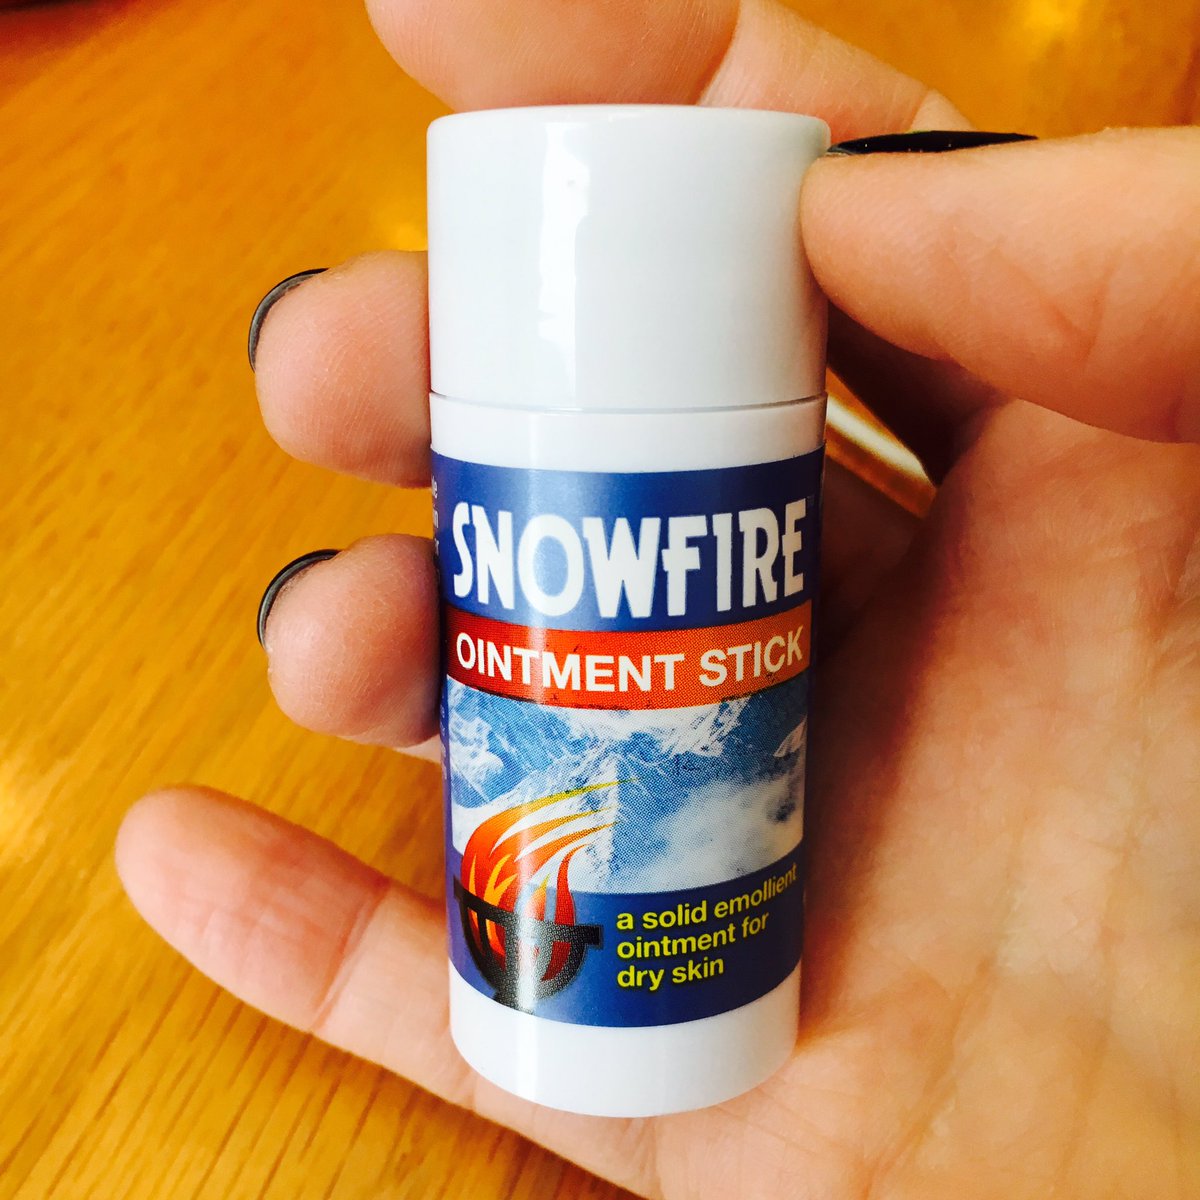 Oh you, the person that named this stuff, the irony is not lost me...

You're an evil genius!! #SnowFire #TheWonderStick #ChilblainRelief